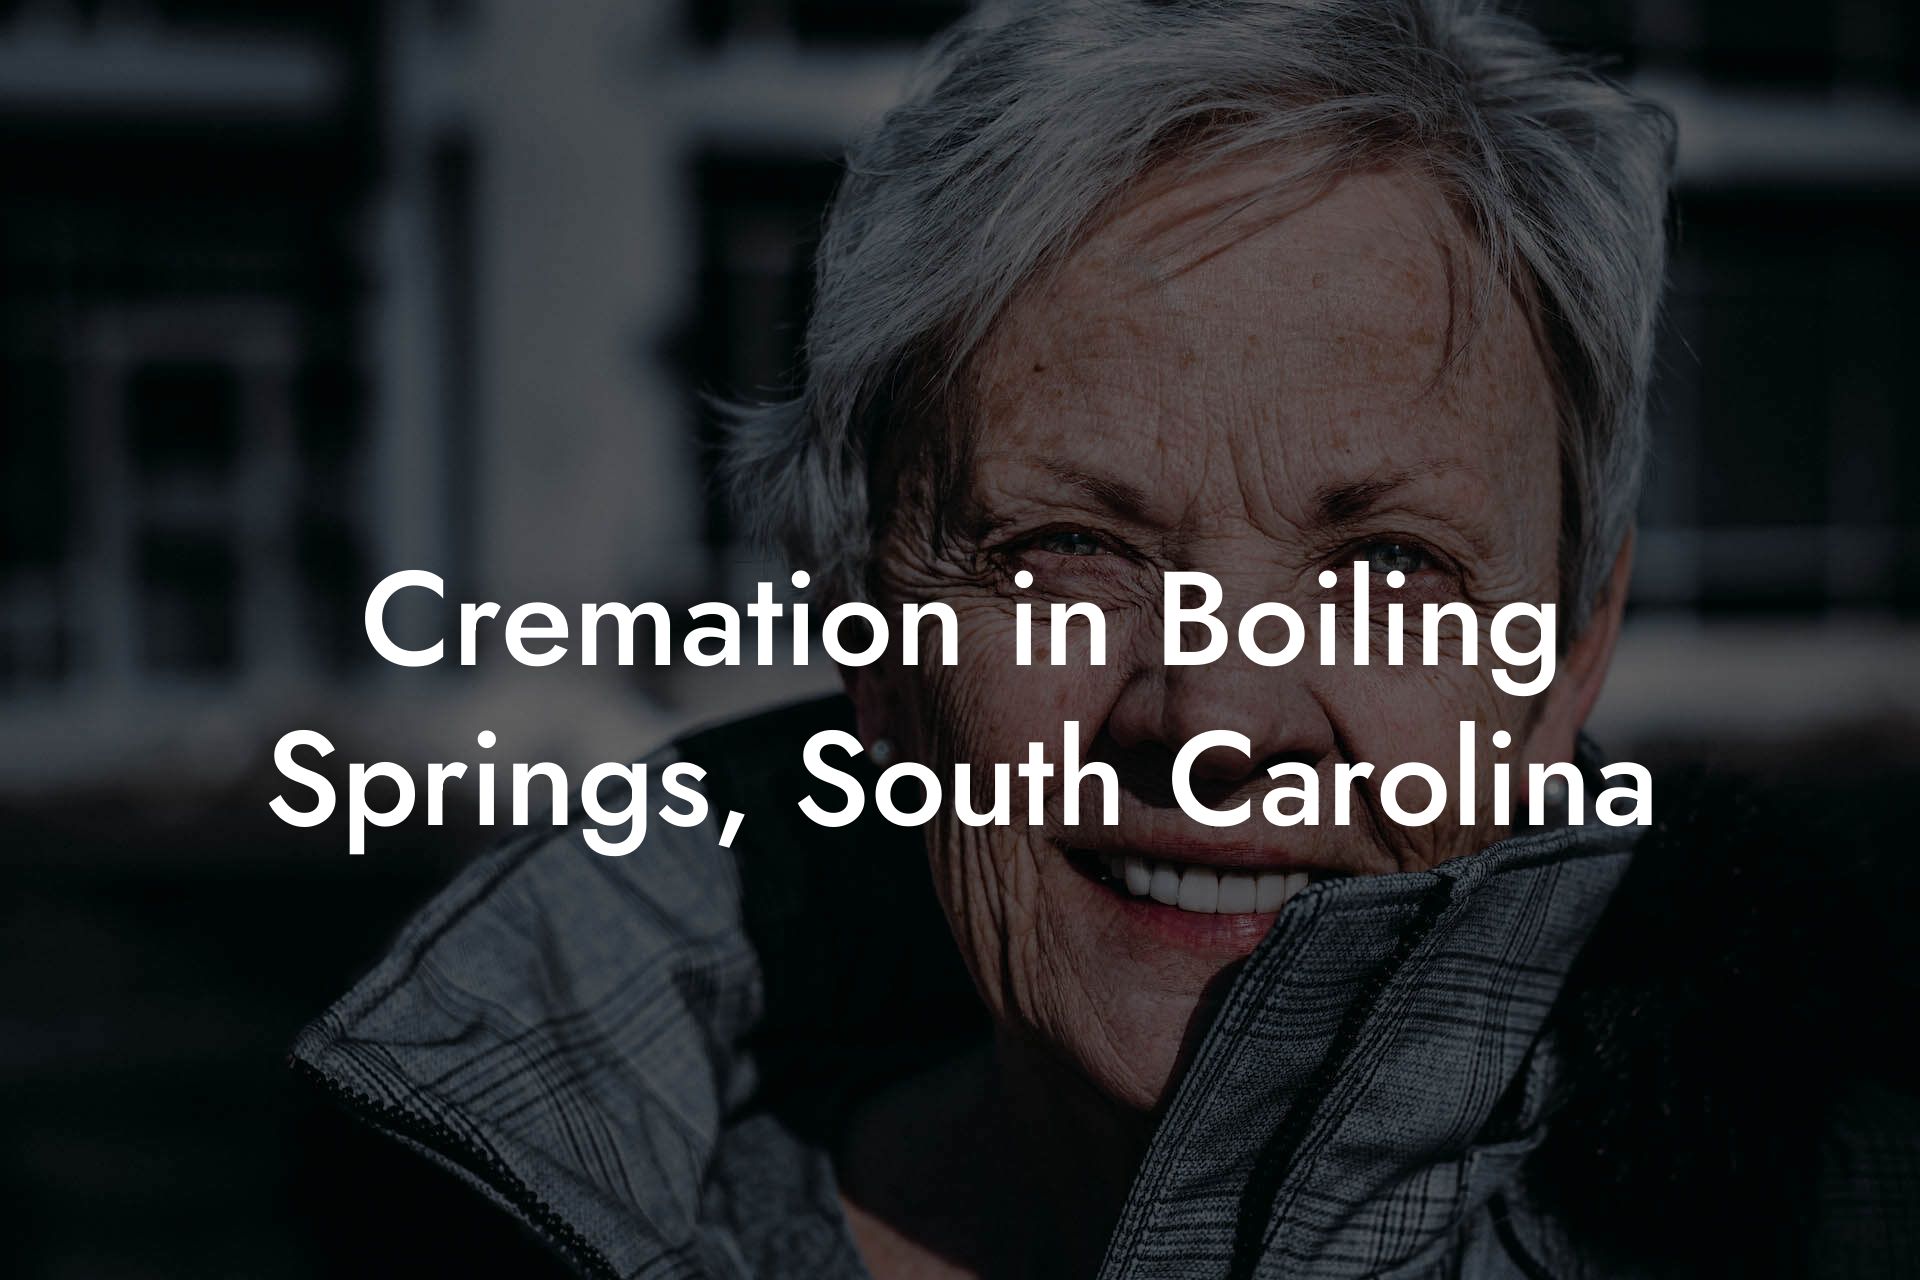 Cremation in Boiling Springs, South Carolina